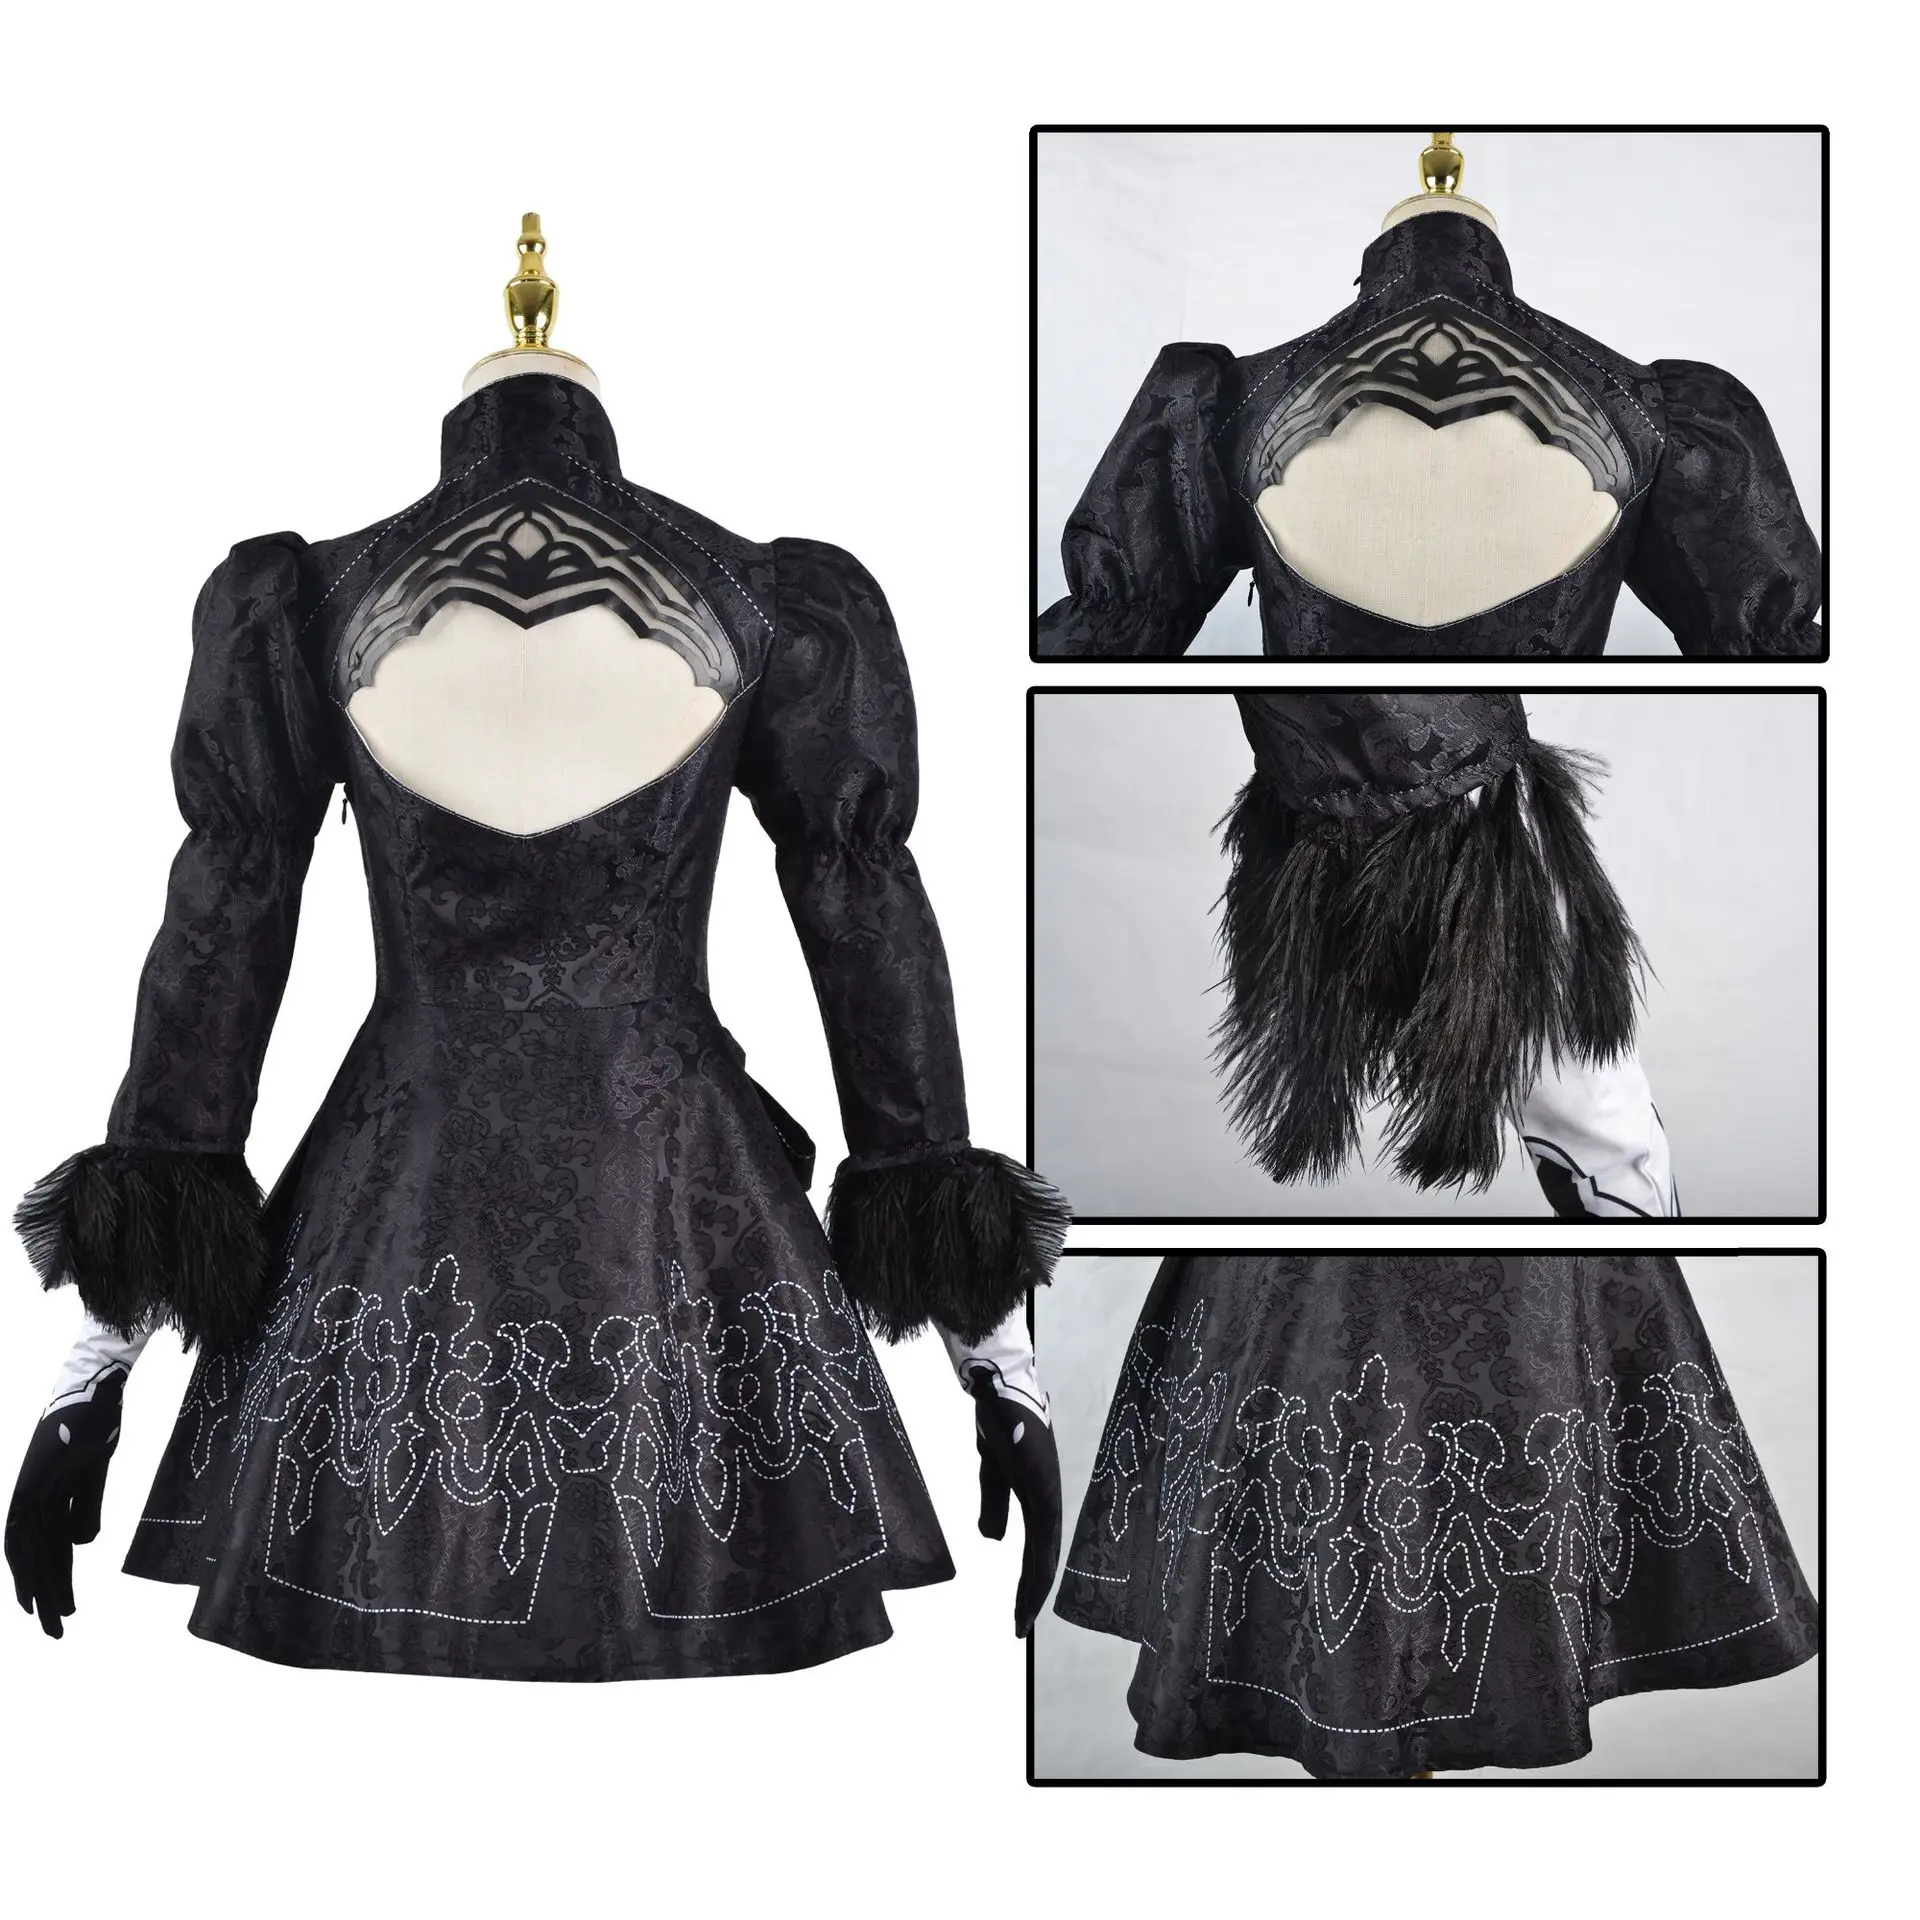  Family Wednesday Costume Vintage Goth Black Raven Dance Dress  Cosplay Women Girl Tulle Lace Skirt Halloween Party Outfit (3XL-Dress):  Clothing, Shoes & Jewelry